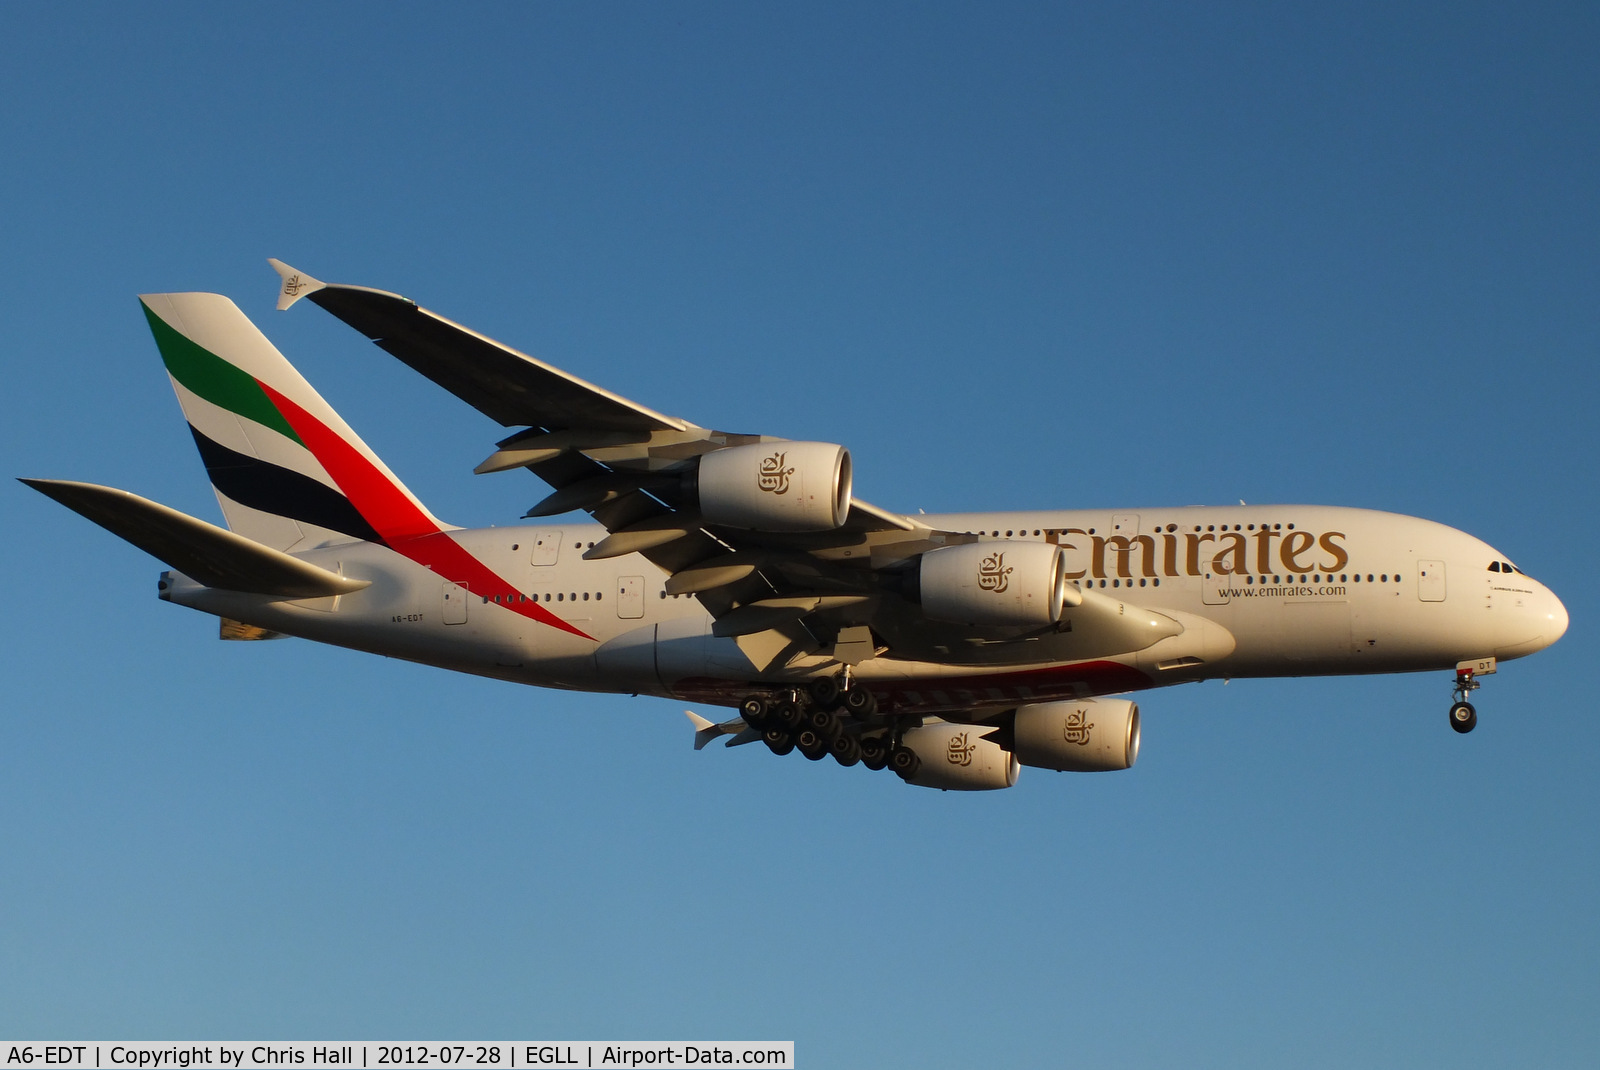 A6-EDT, 2011 Airbus A380-861 C/N 090, Emirates